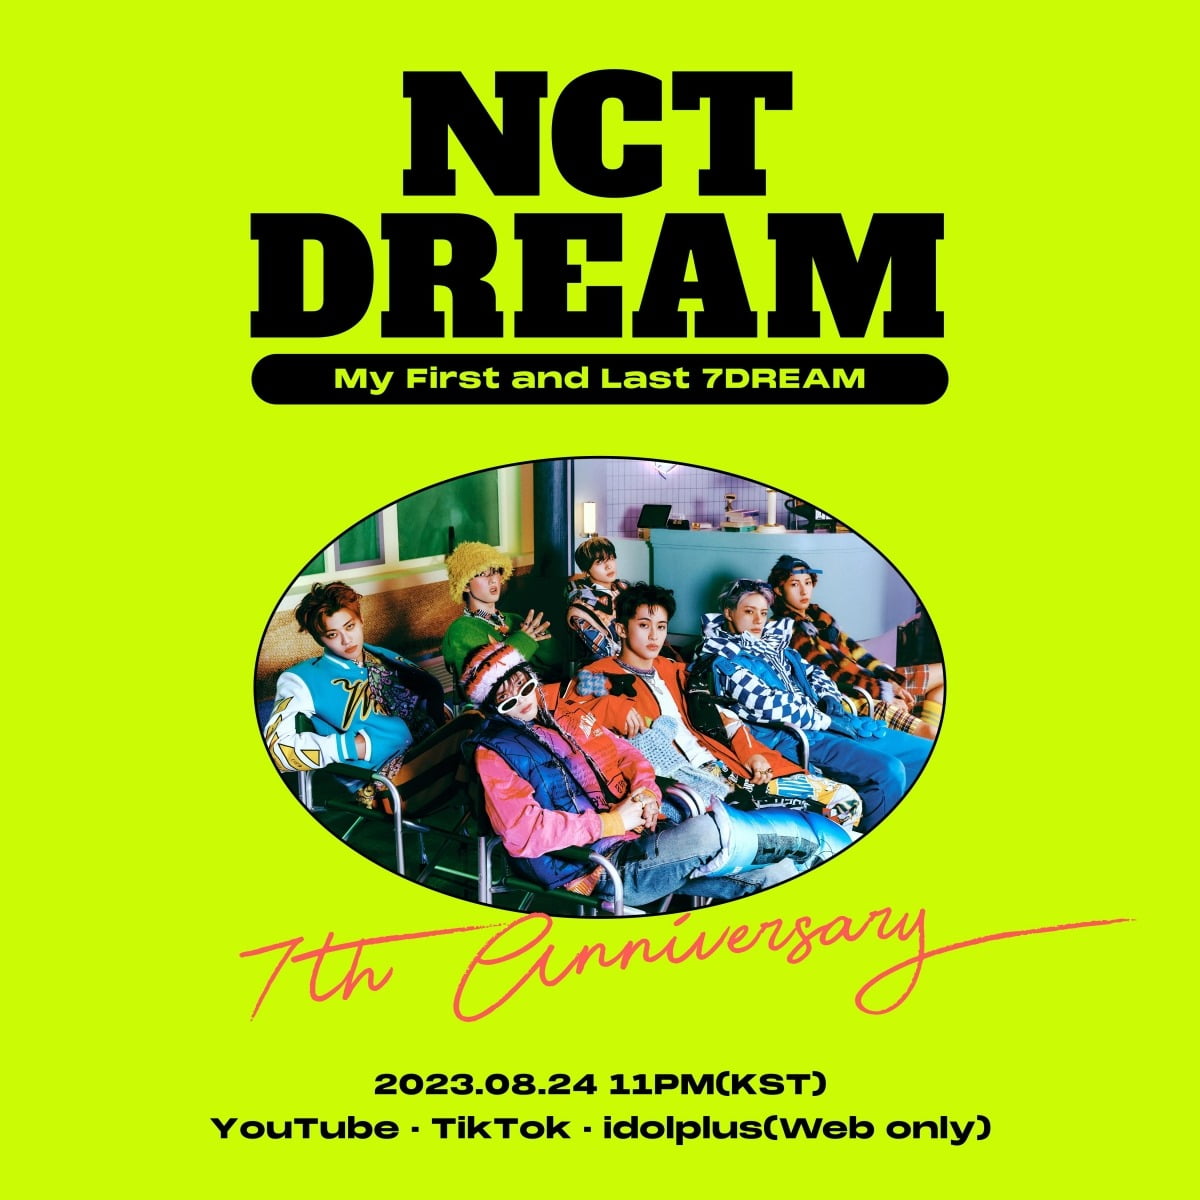 NCT DREAM will hold a special live broadcast to celebrate the 7th anniversary of their debut.